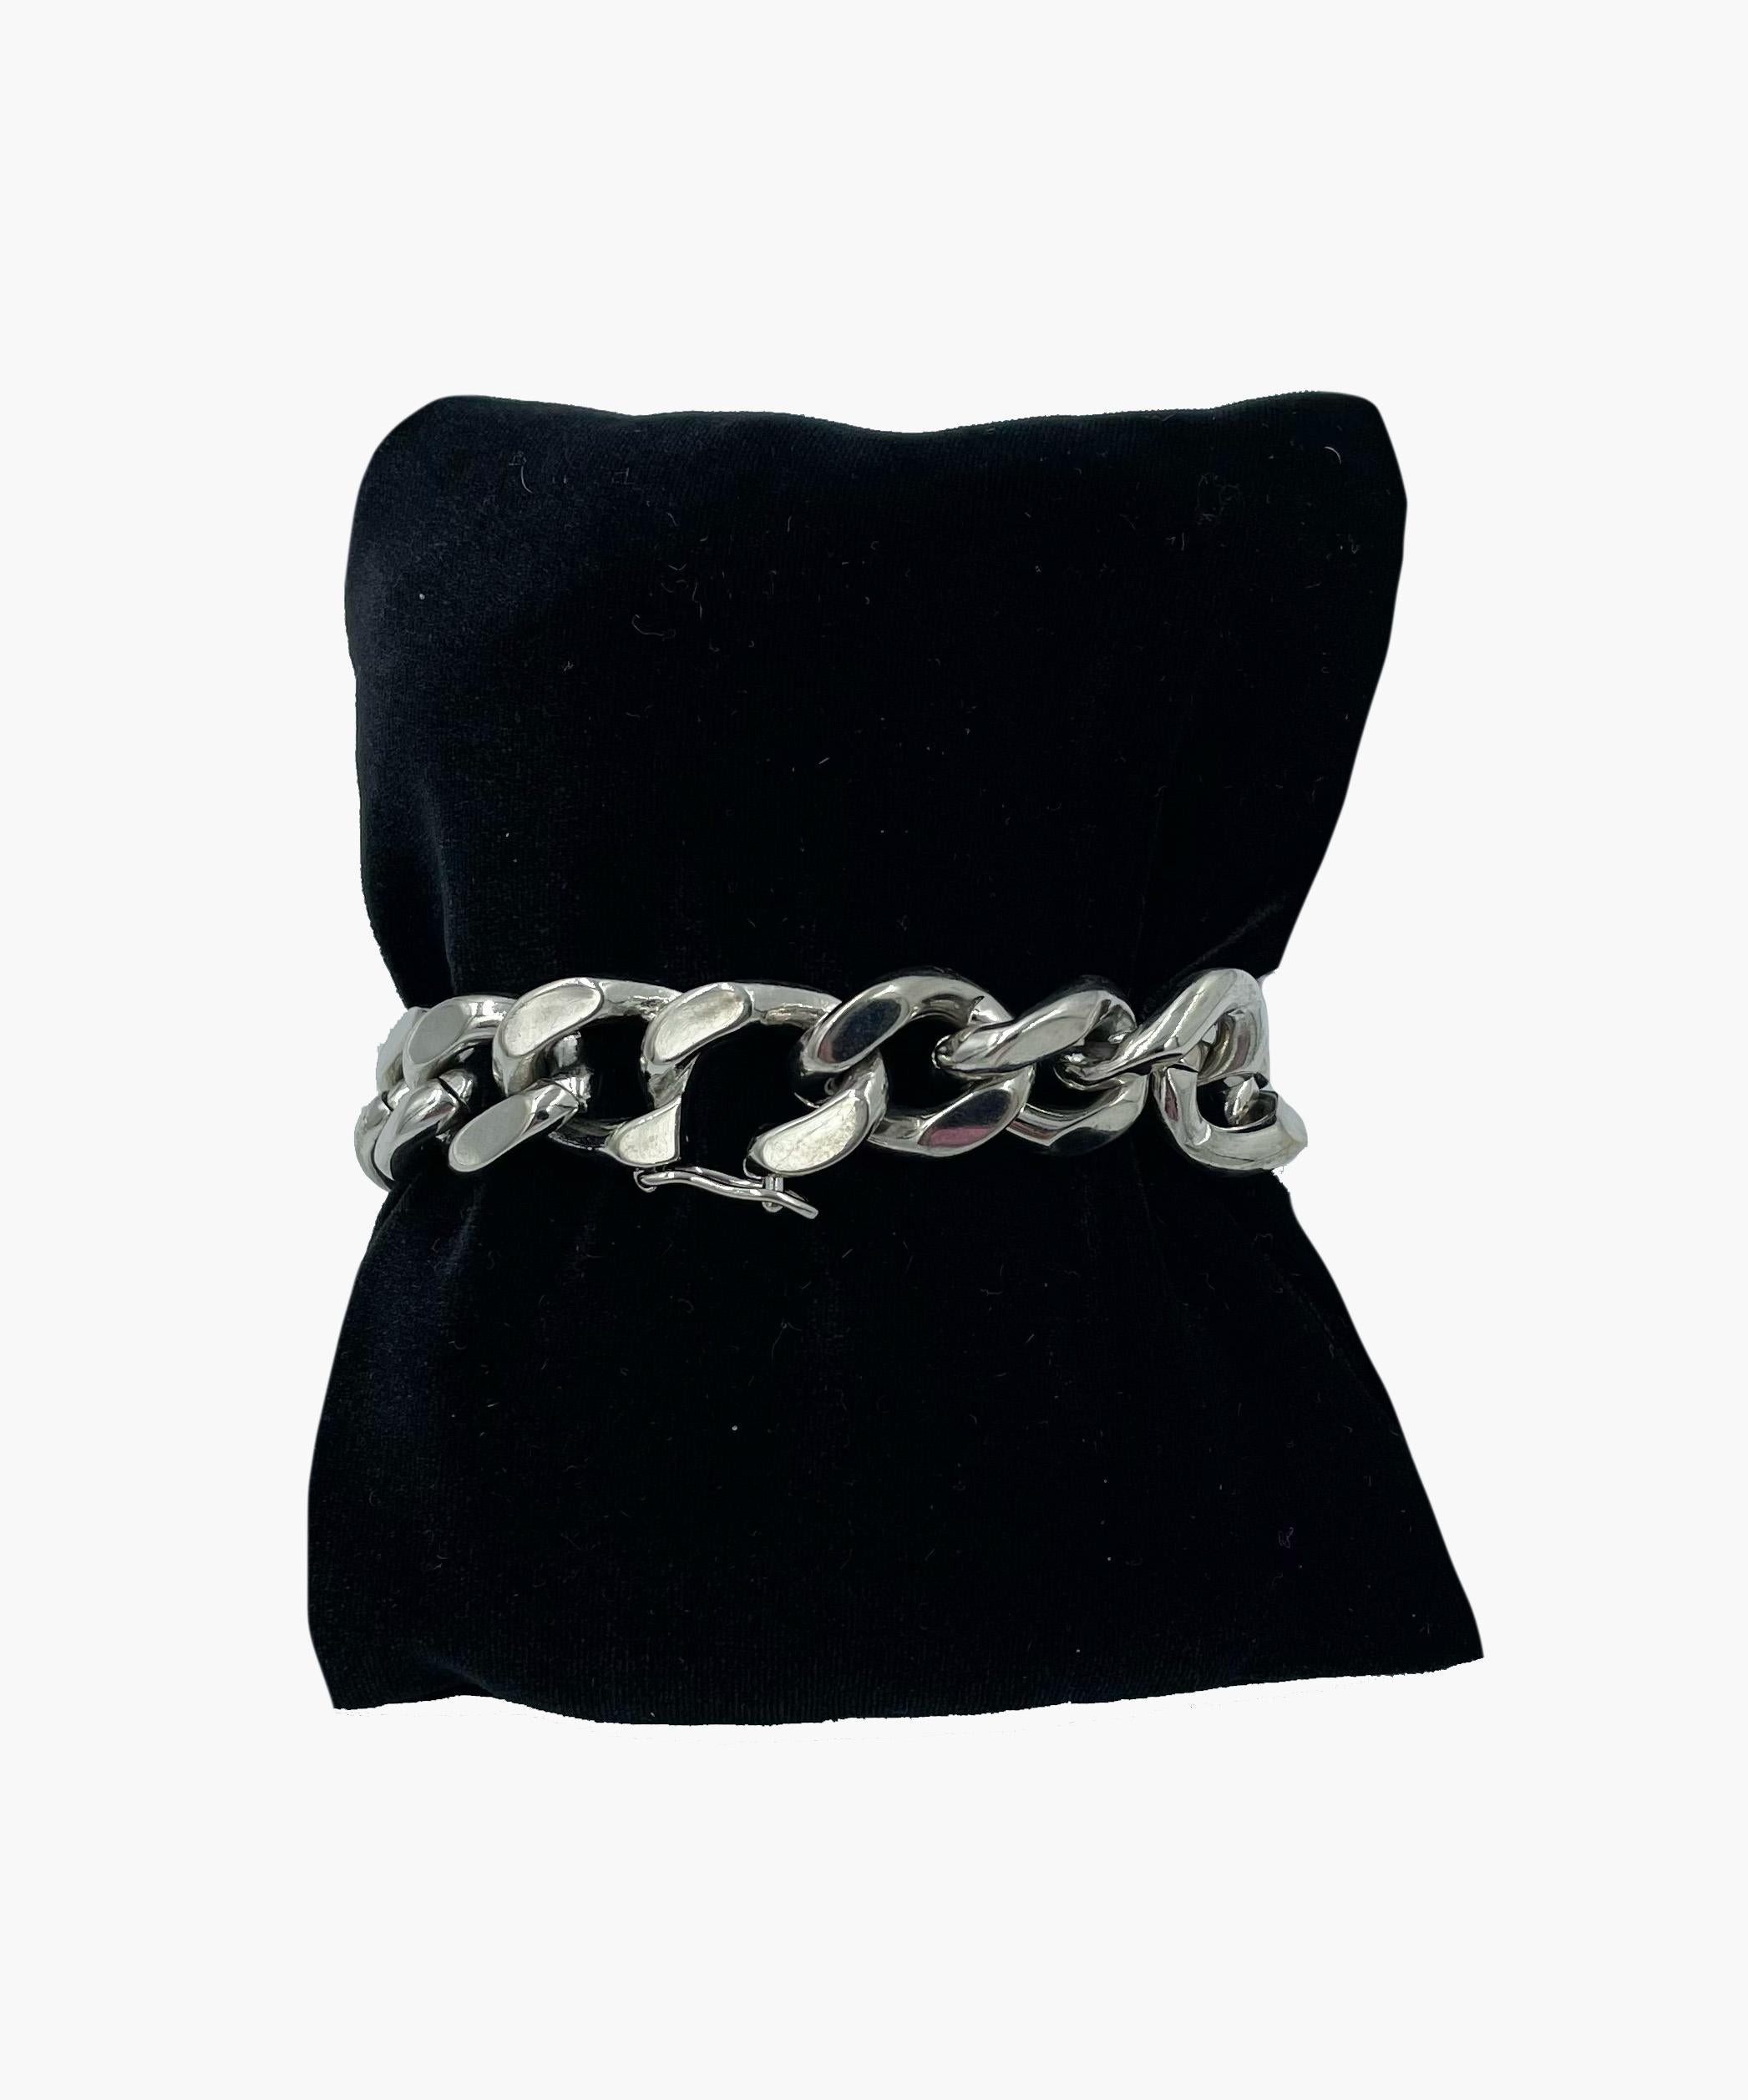 Iconic chain style massive Dior bracelet in silver tone with DIOR logo plaque and lipgloss inside. Gourmette collection. 
Period: 2000s 
Total length: 20cm 
Condition: very good. Light scratches throughout metal. Lipgloss is used. Please see